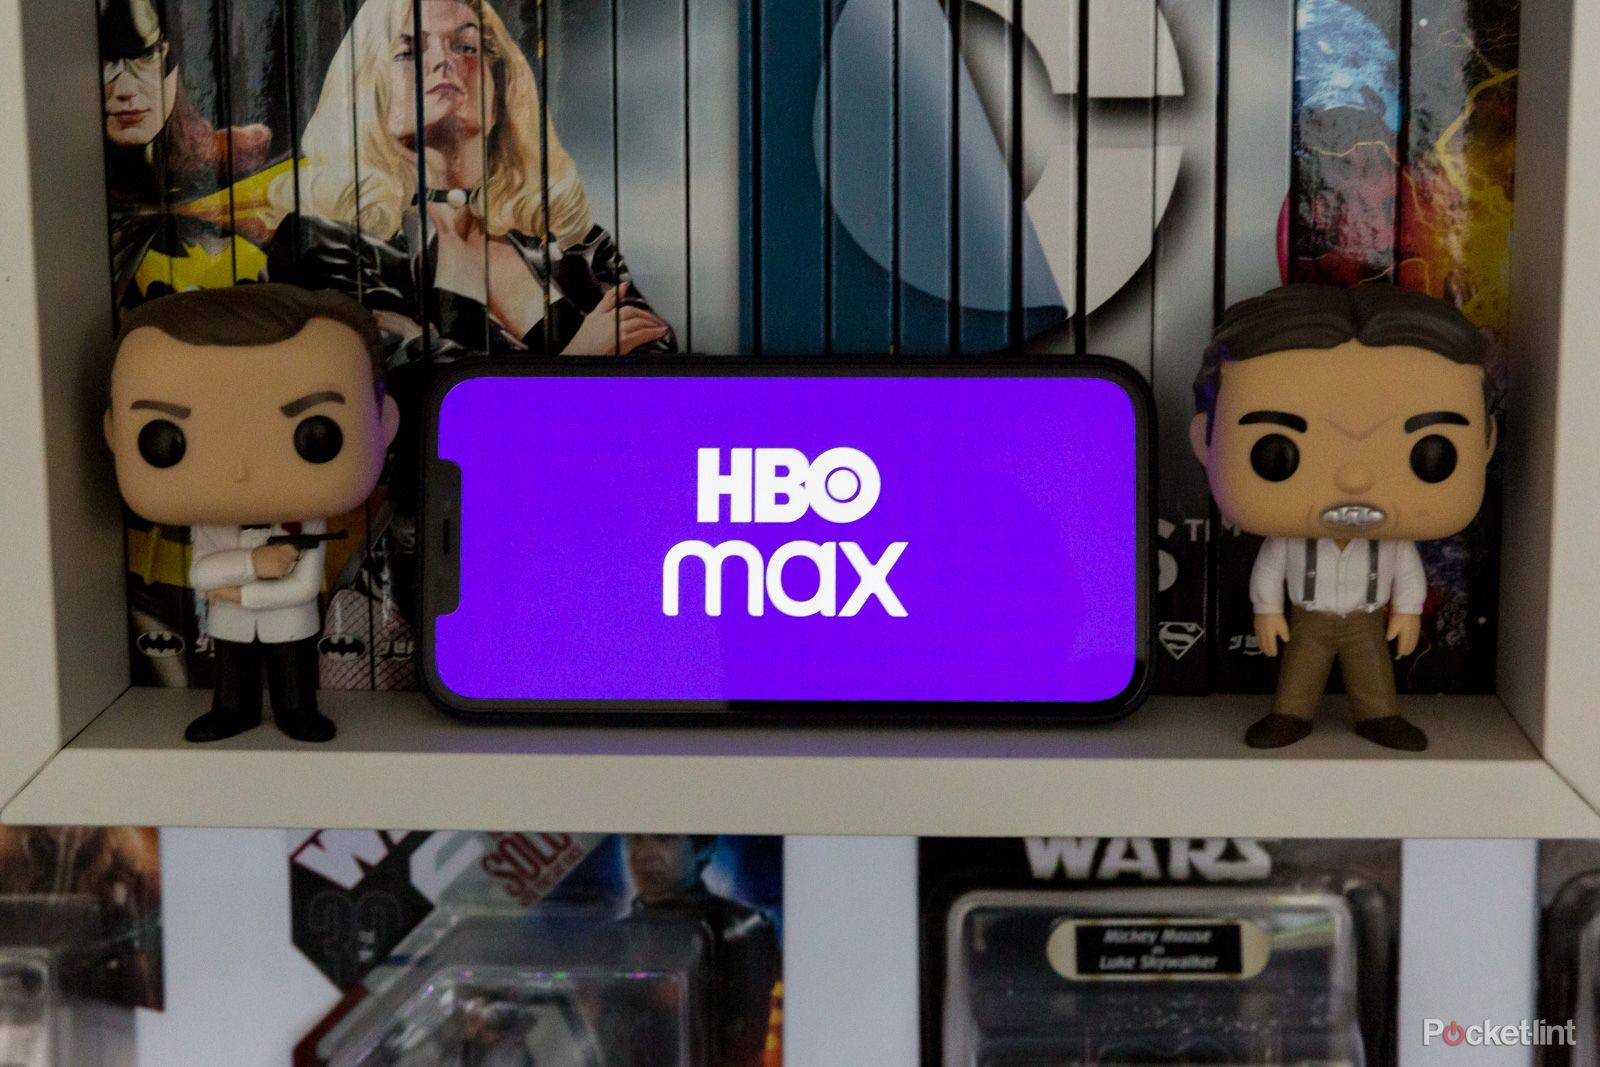 HBO Max logo on an iPhone